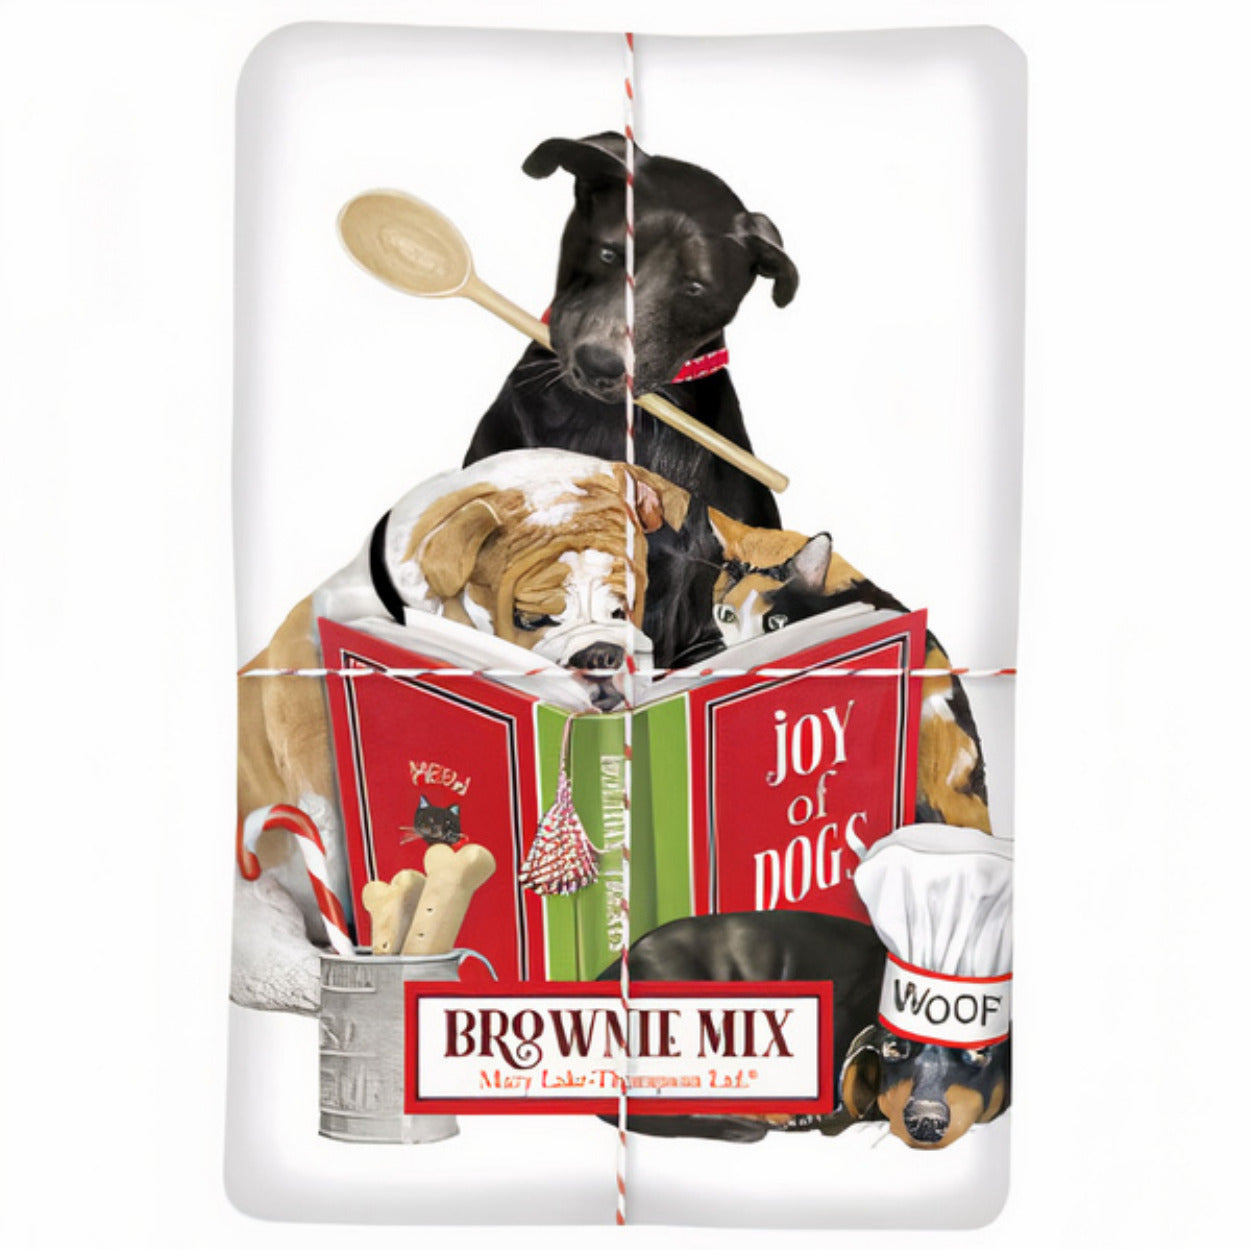 Holiday Pet Chefs Brownie Mix Wrapped in Flour Sack Towel 